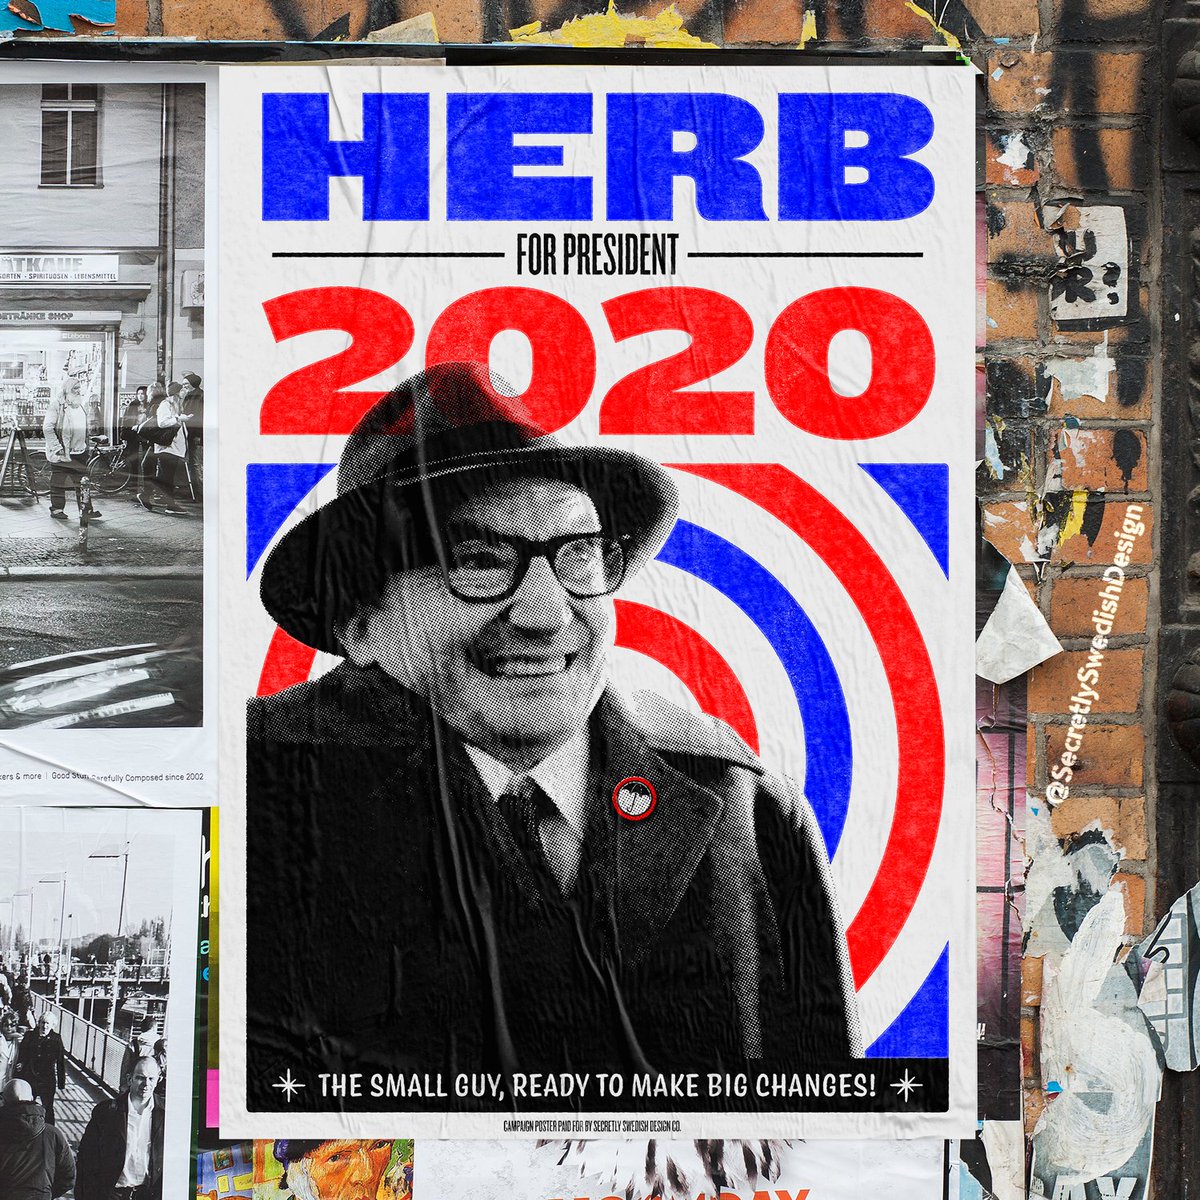 Loved season 2 of @UmbrellaAcad, but this guy was the real hero. #UmbrellaAcademy #UmbrellaAcademy2 #VoteHerb #HerbFor2020